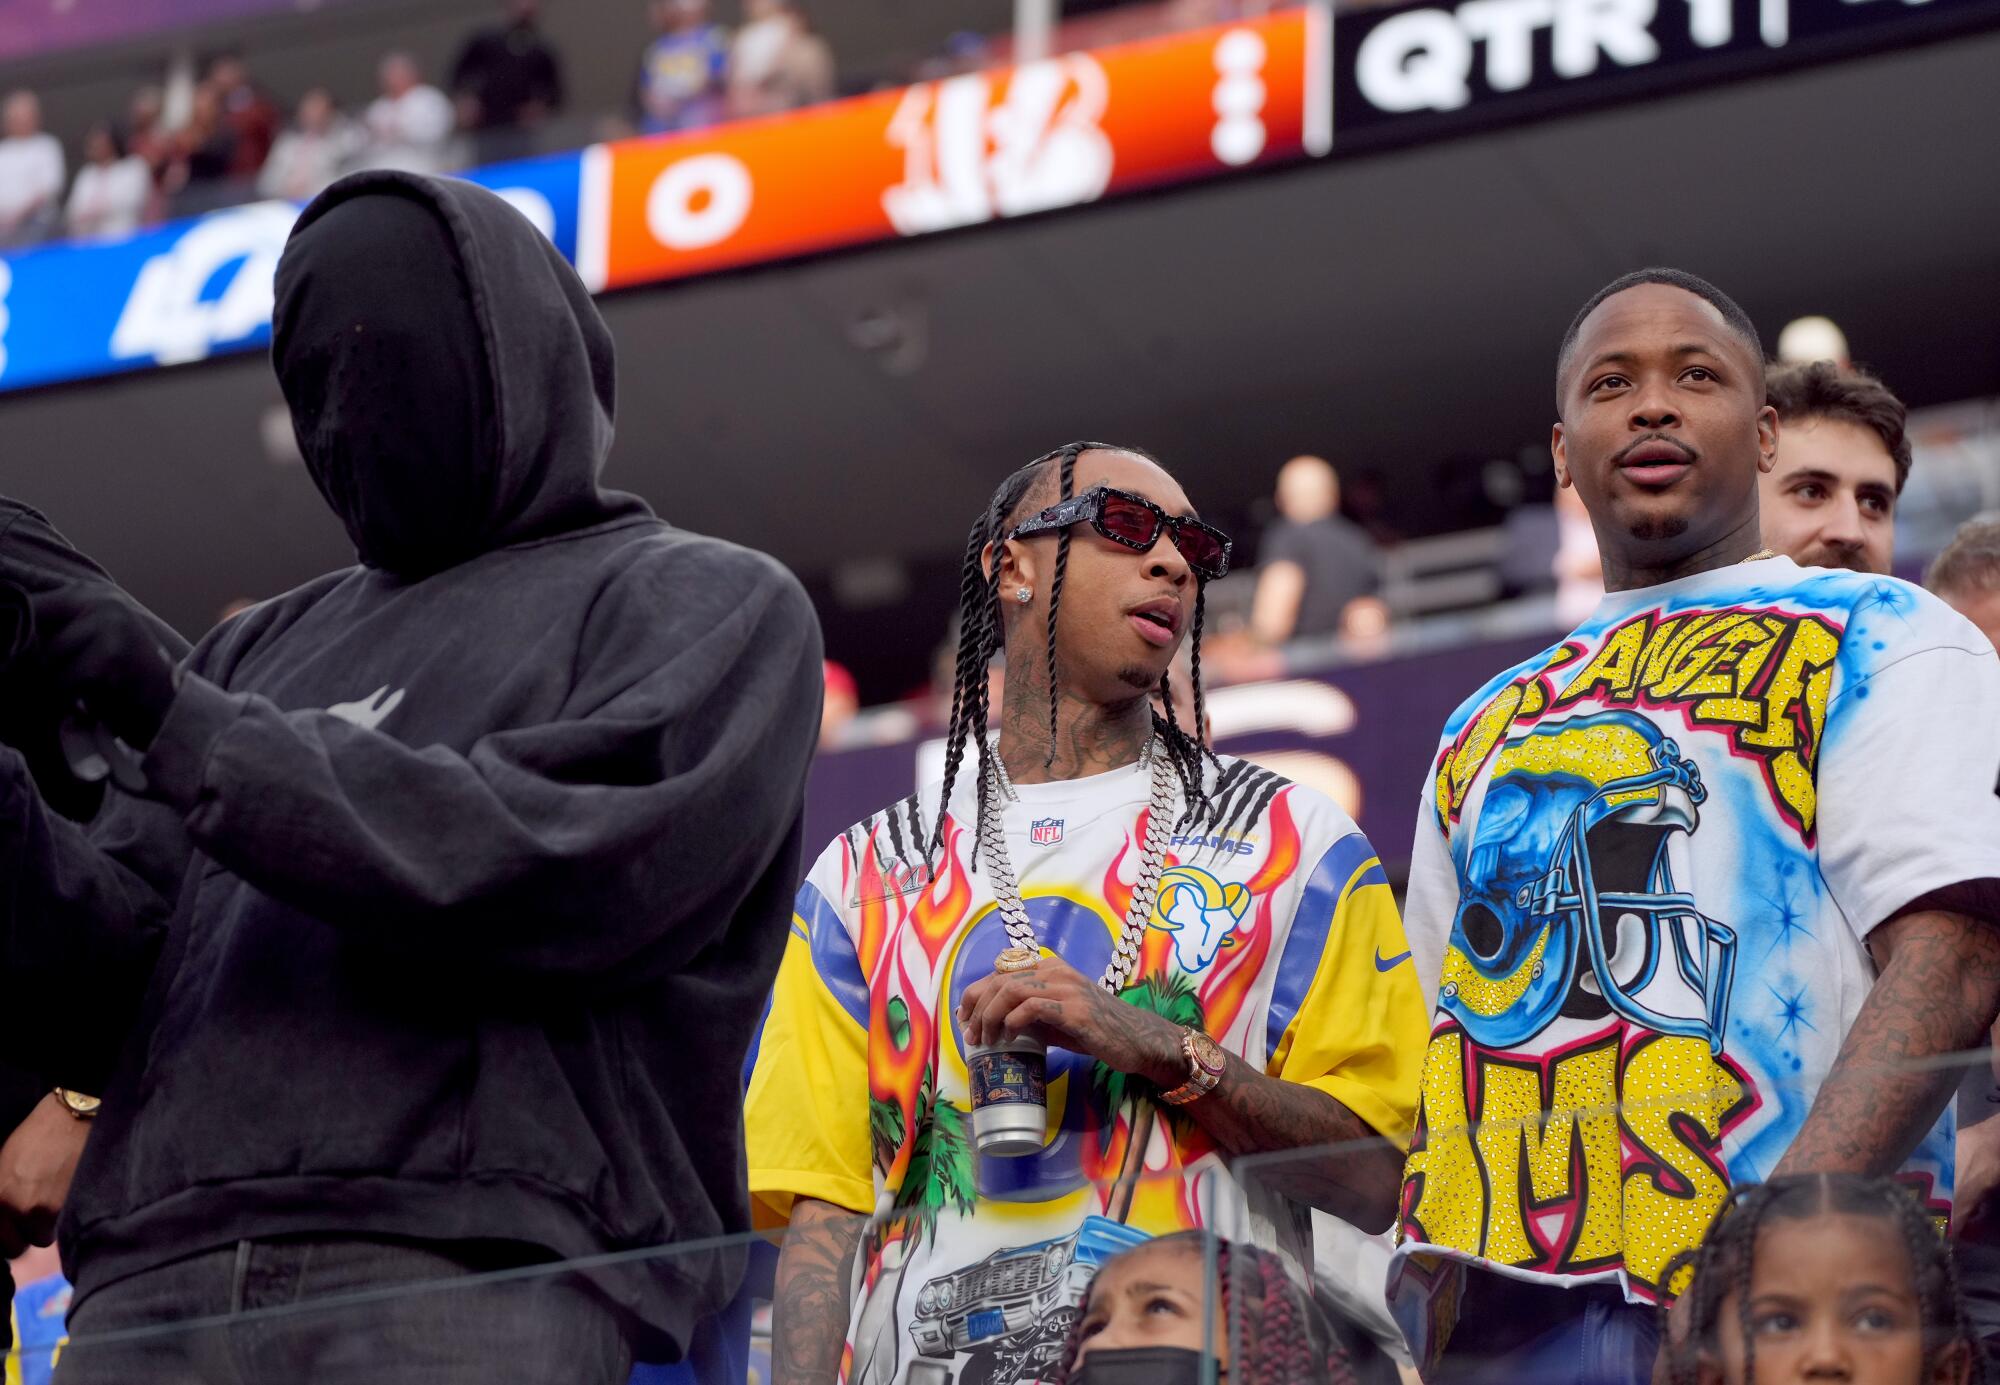 A hooded man dressed entirely in black next to two men in colorful shirts at a football game.